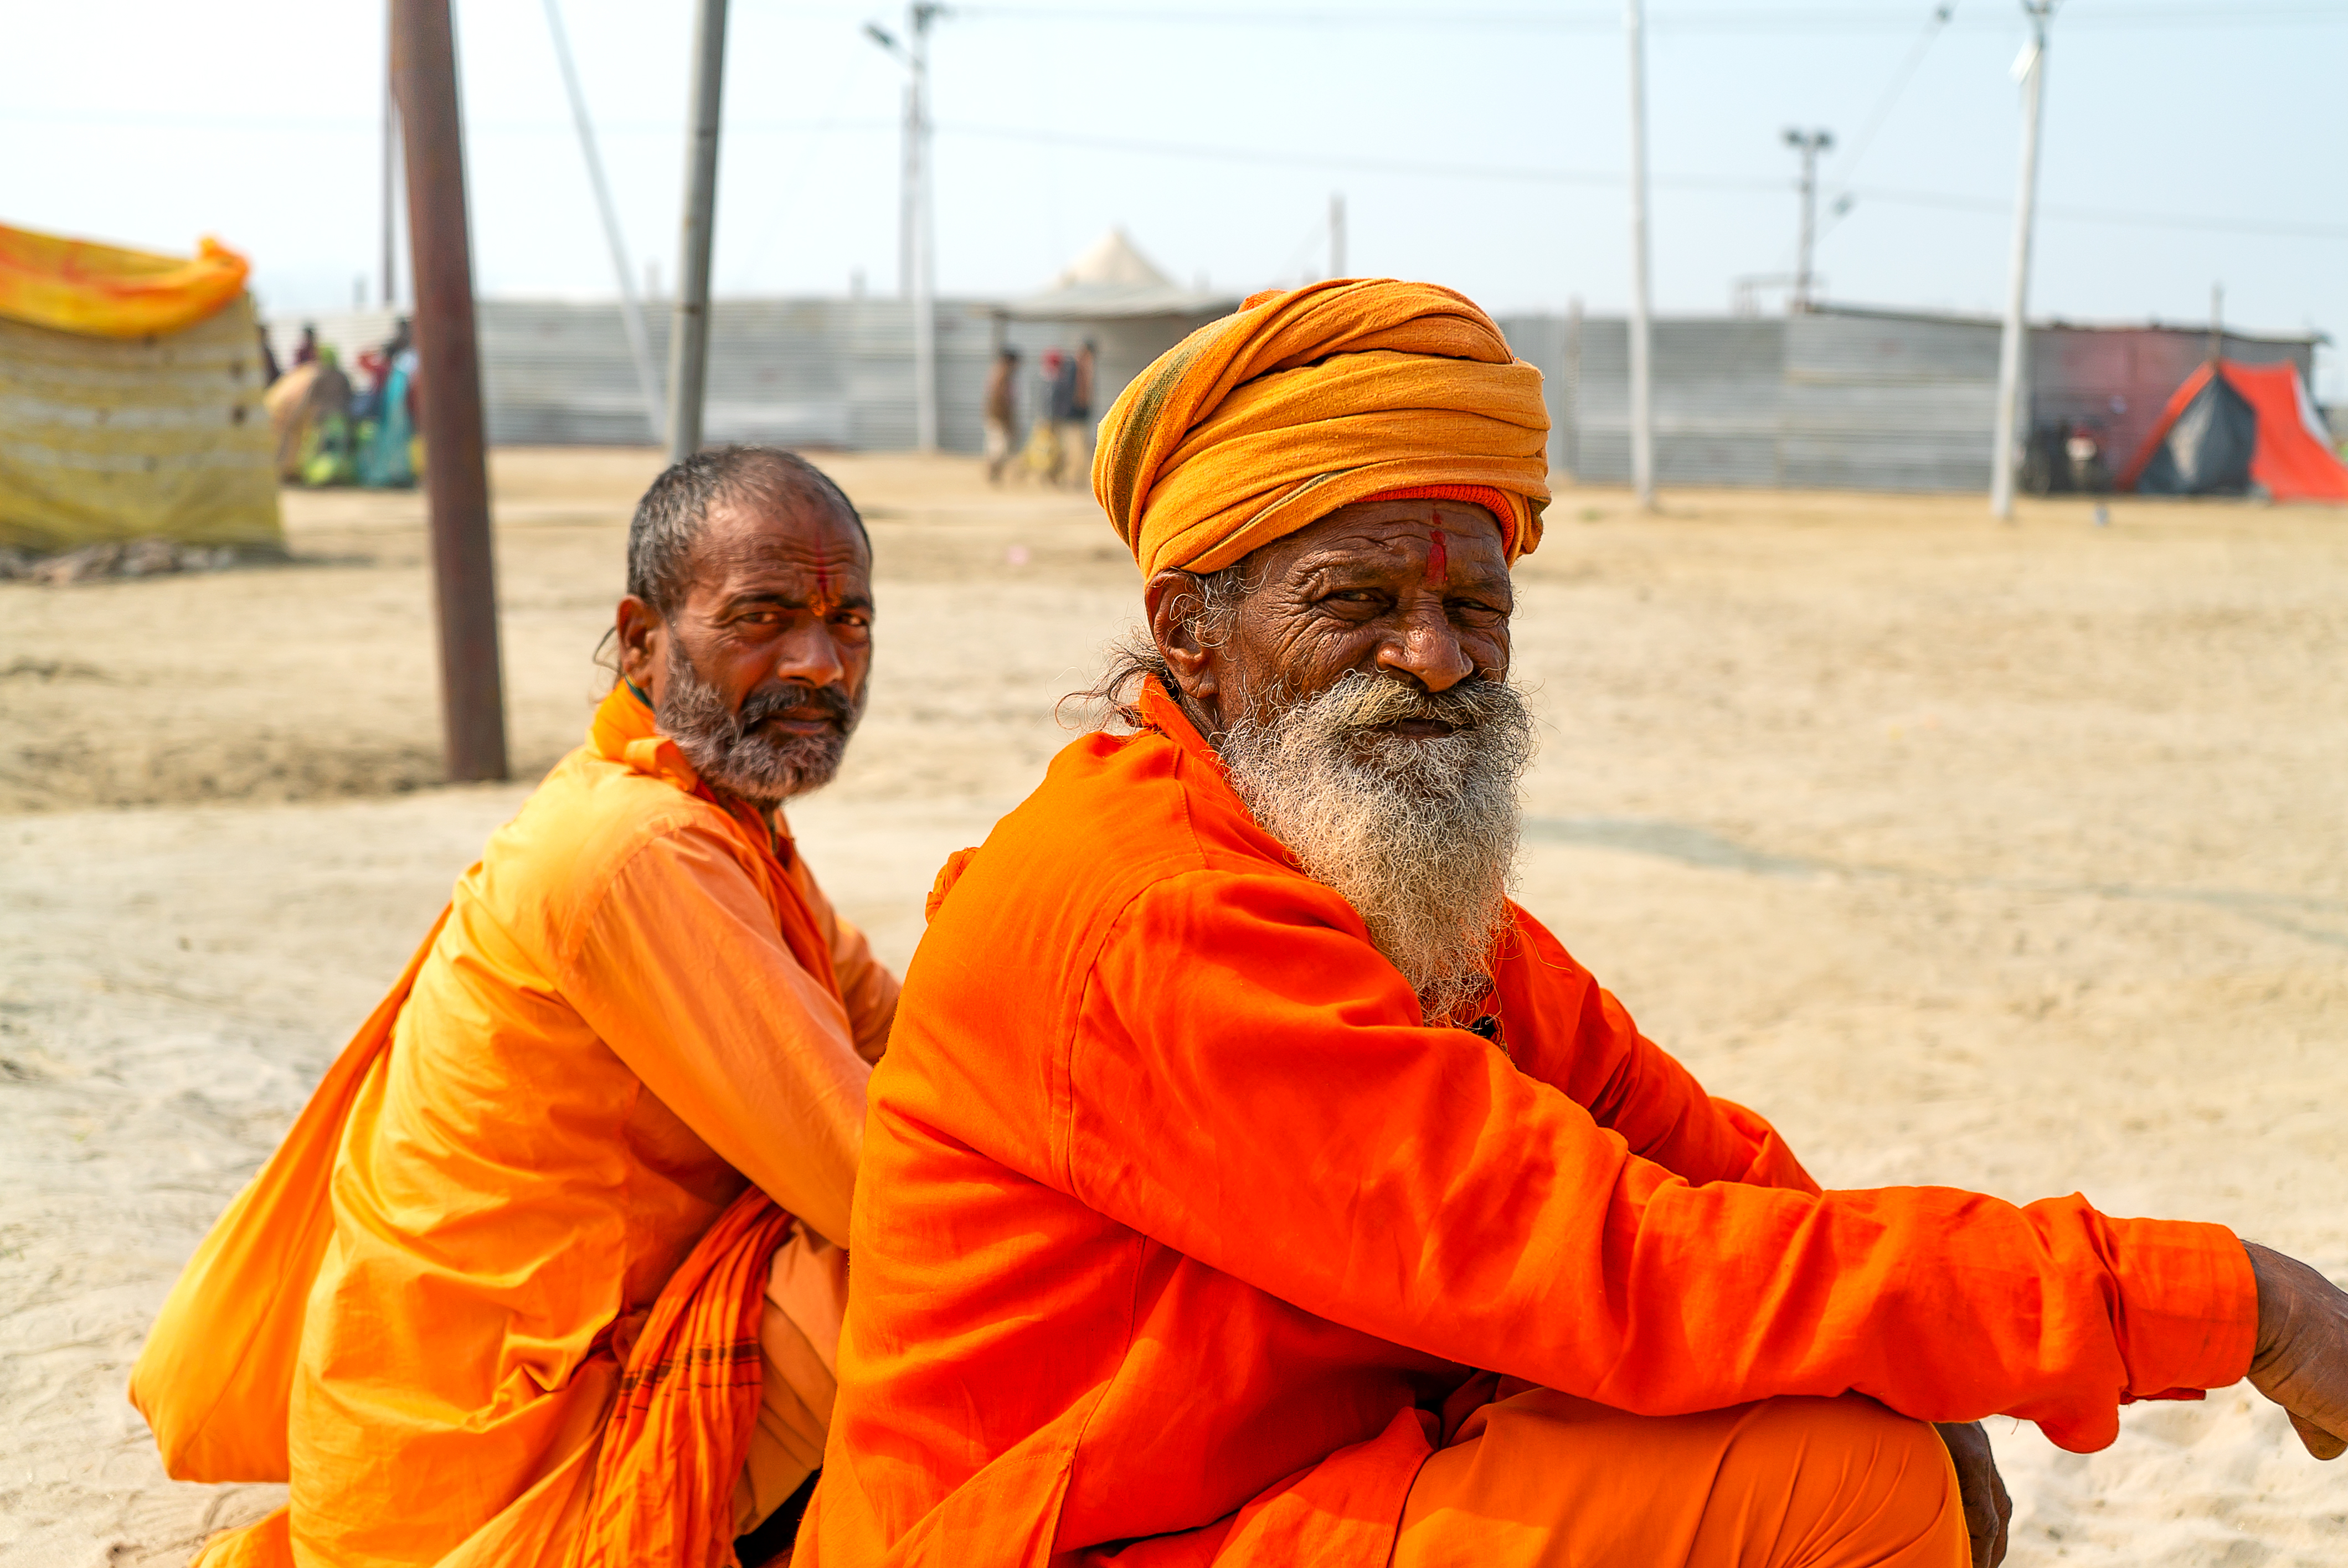 Kumbh Mela 2019: The People Beyond The Pageantry